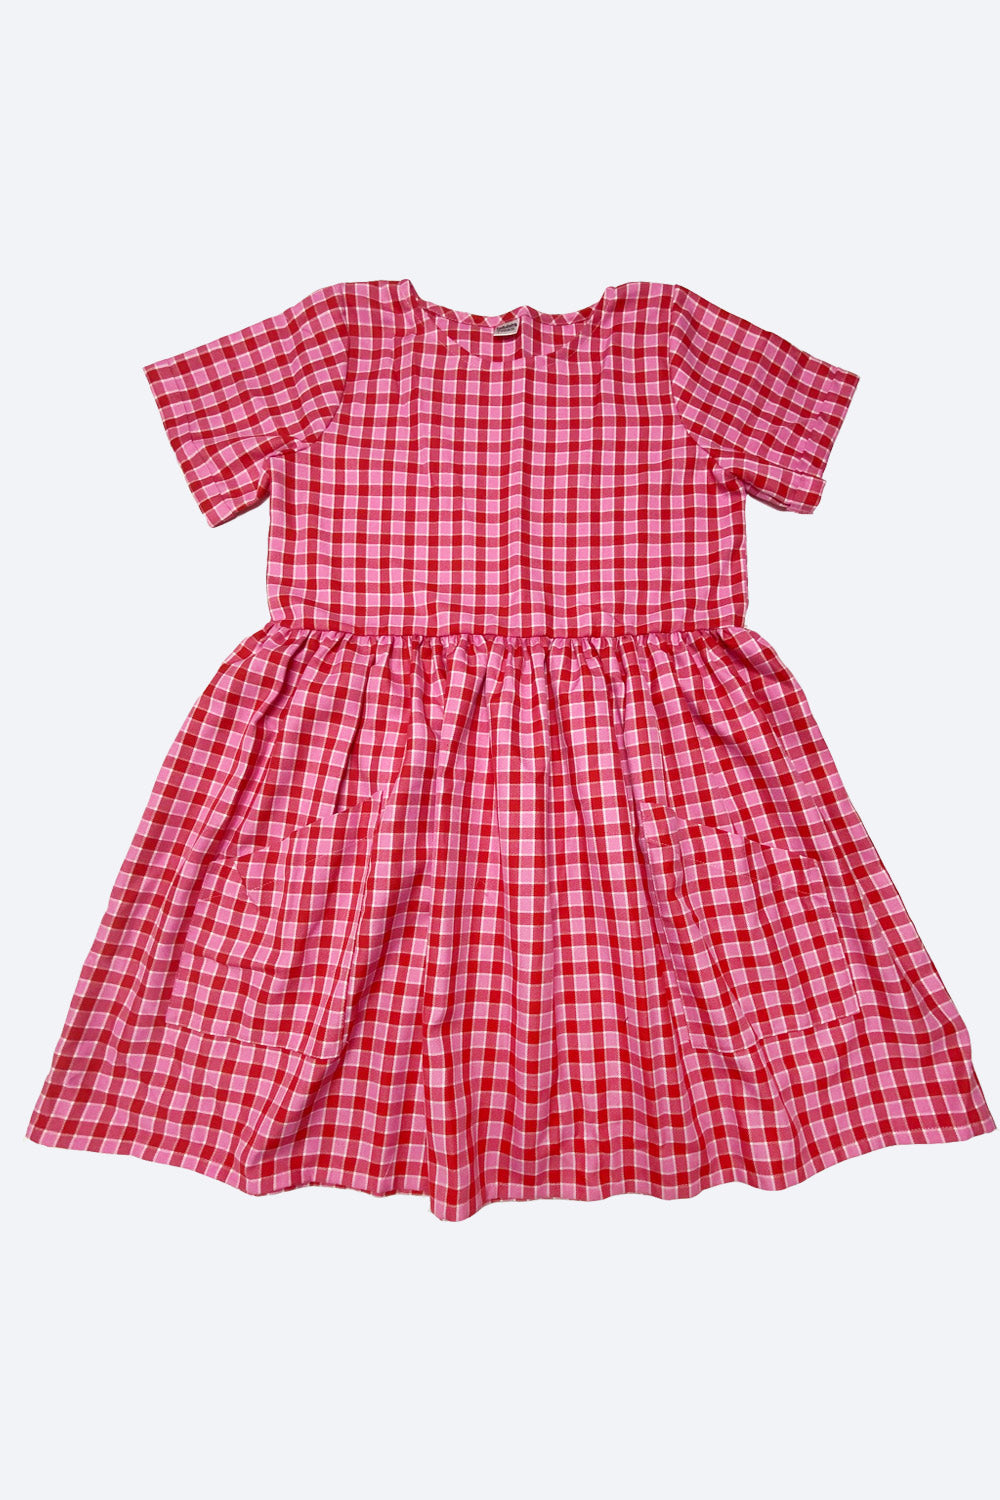 Emily Dress Pink & Red Gingham